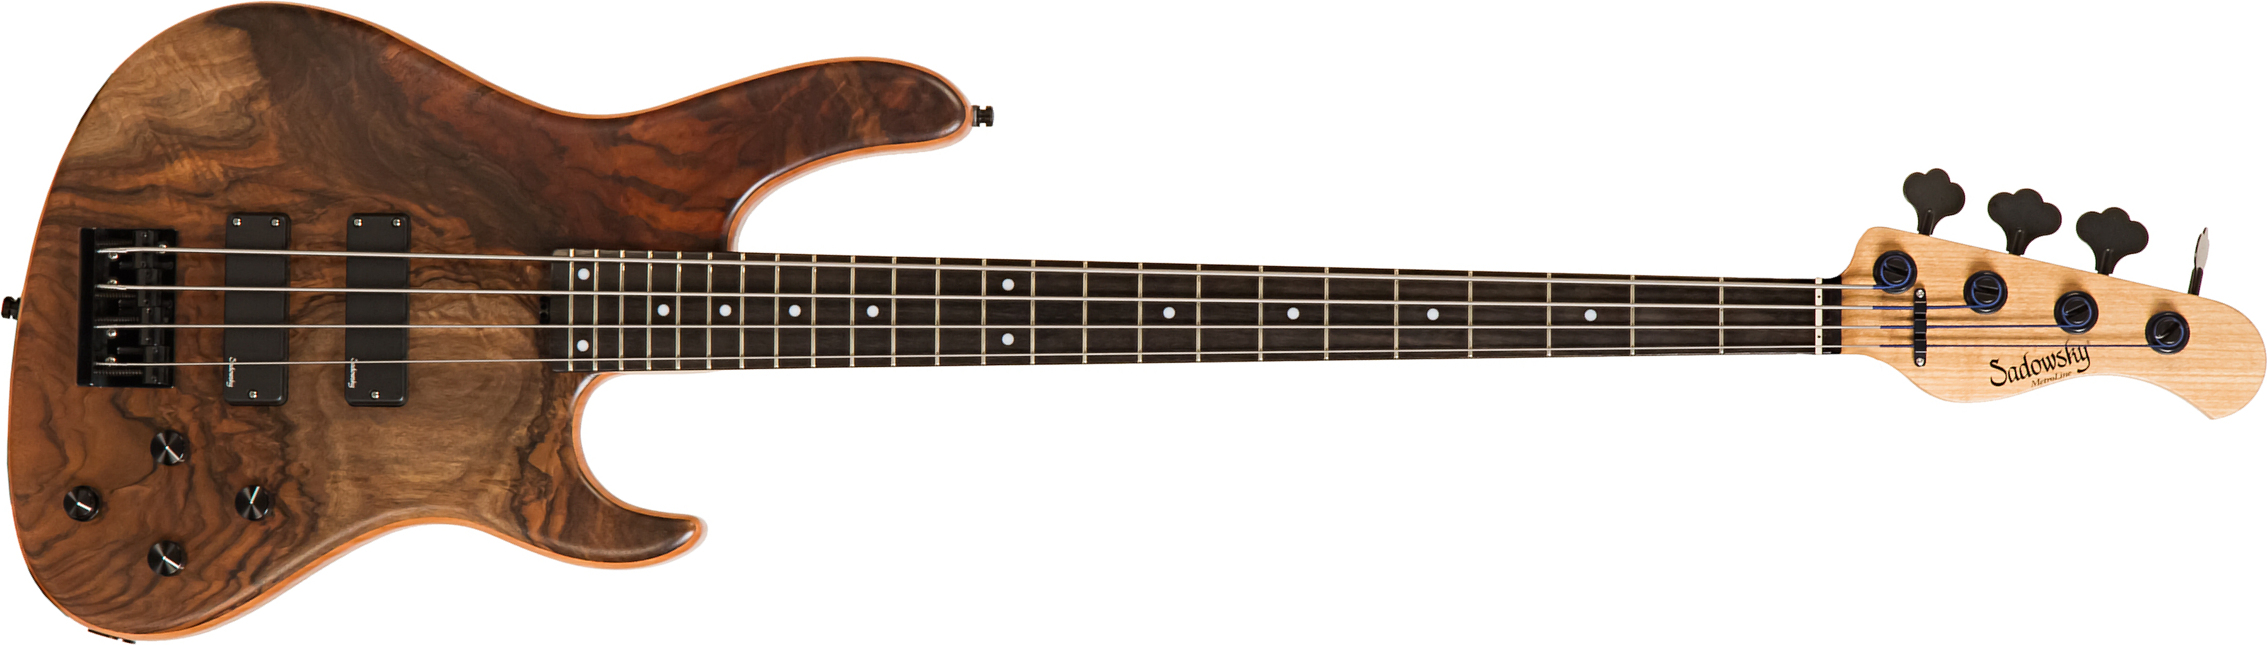 Sadowsky Modern 24 Fret Ash 4c Metroline Ltd All Active Eb - Natural - Solid body electric bass - Main picture